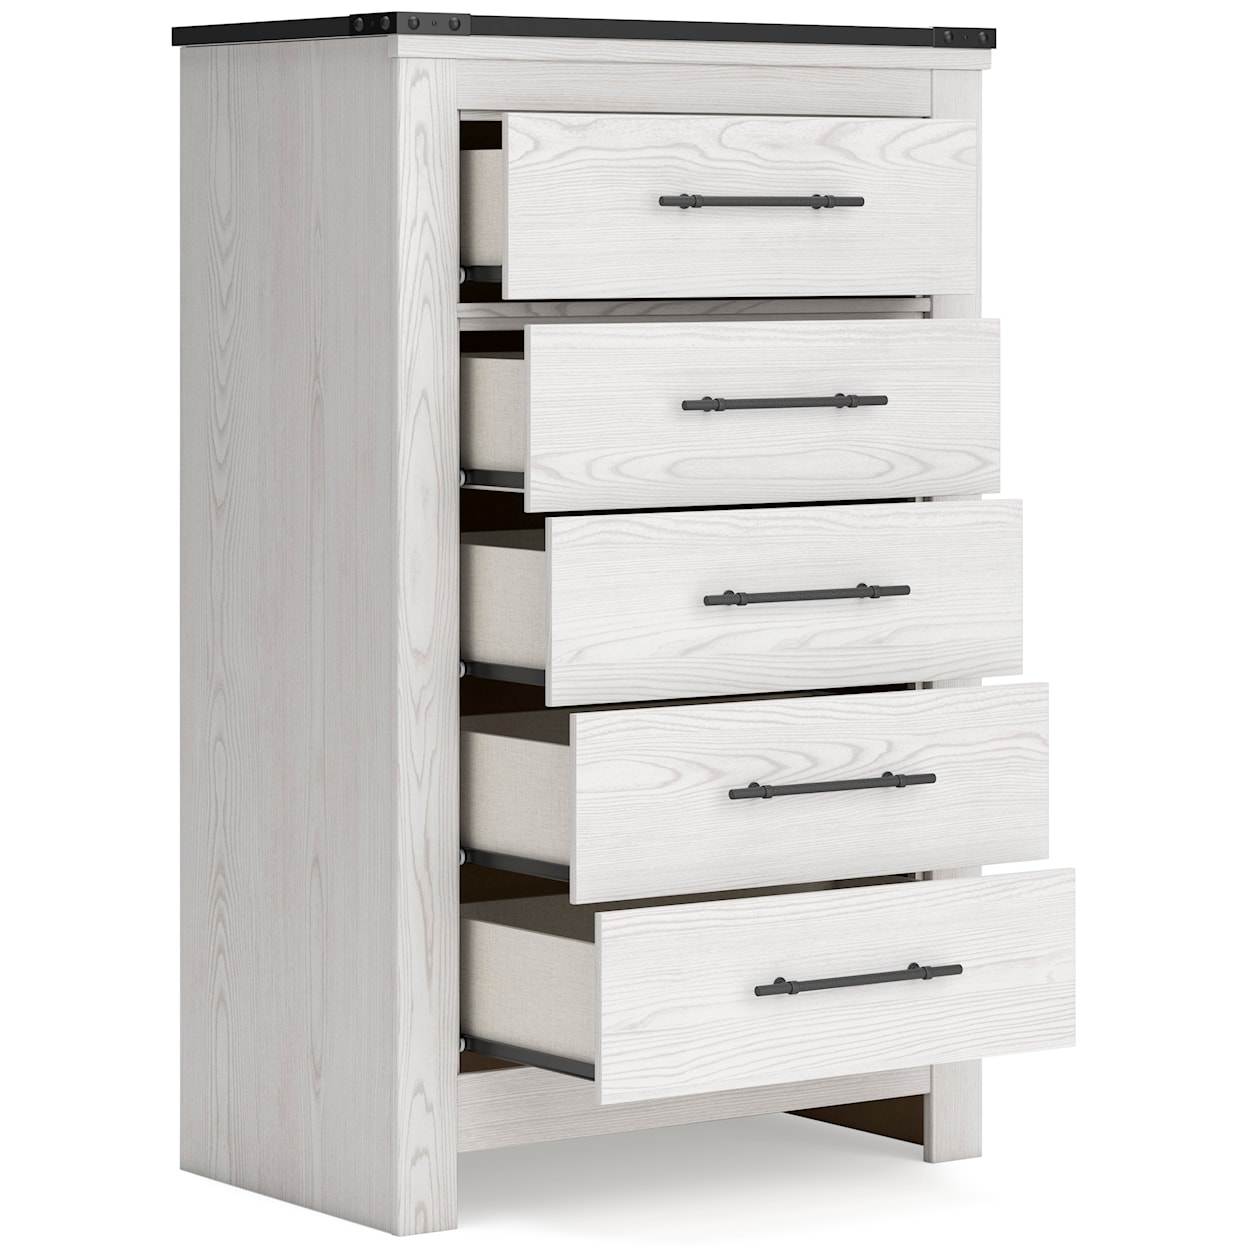 Ashley Furniture Signature Design Schoenberg Chest of Drawers